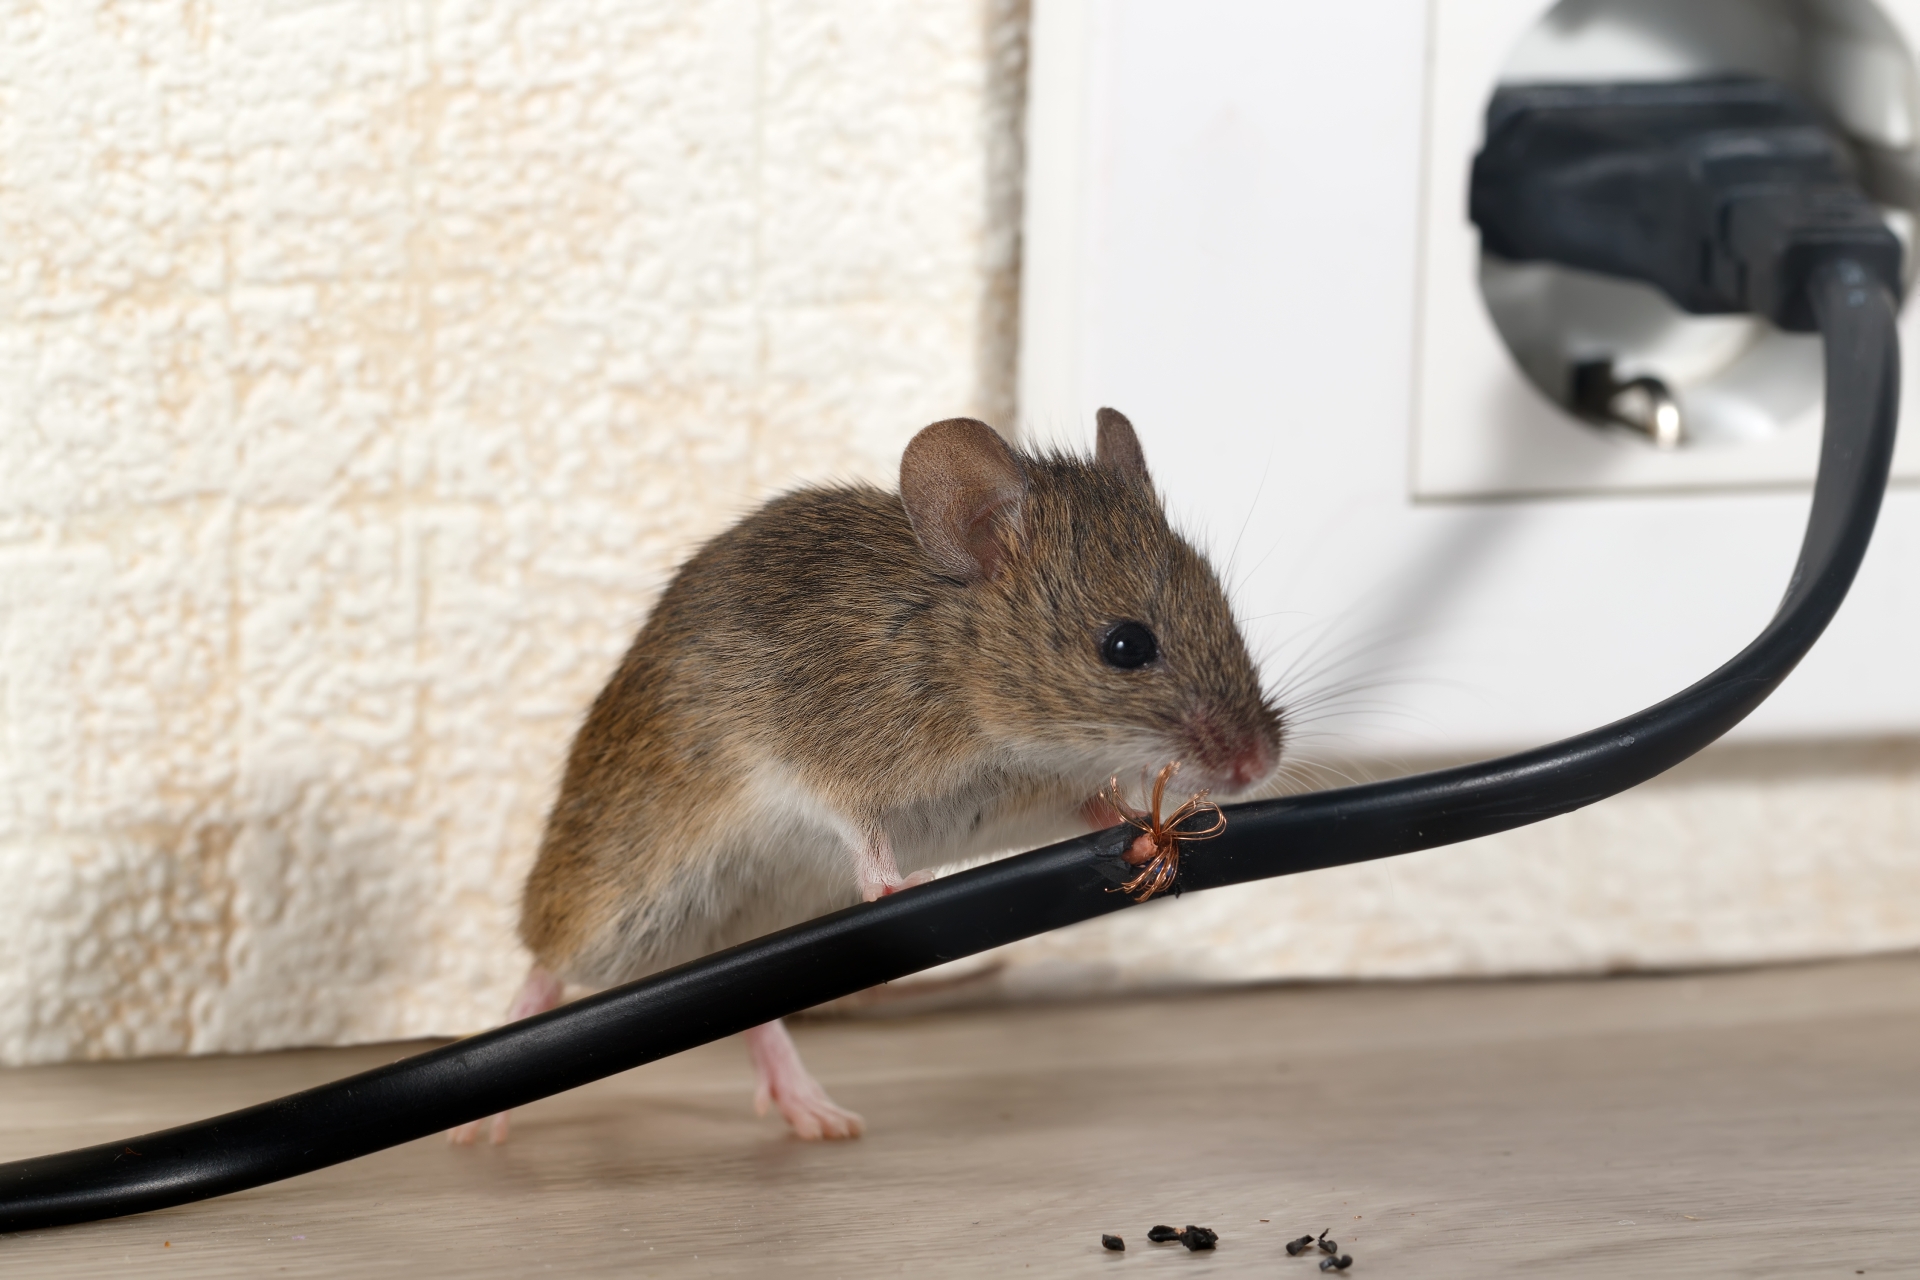 Mice Infestation, Pest Control in West Watford, Holywell, WD18. Call Now 020 8166 9746